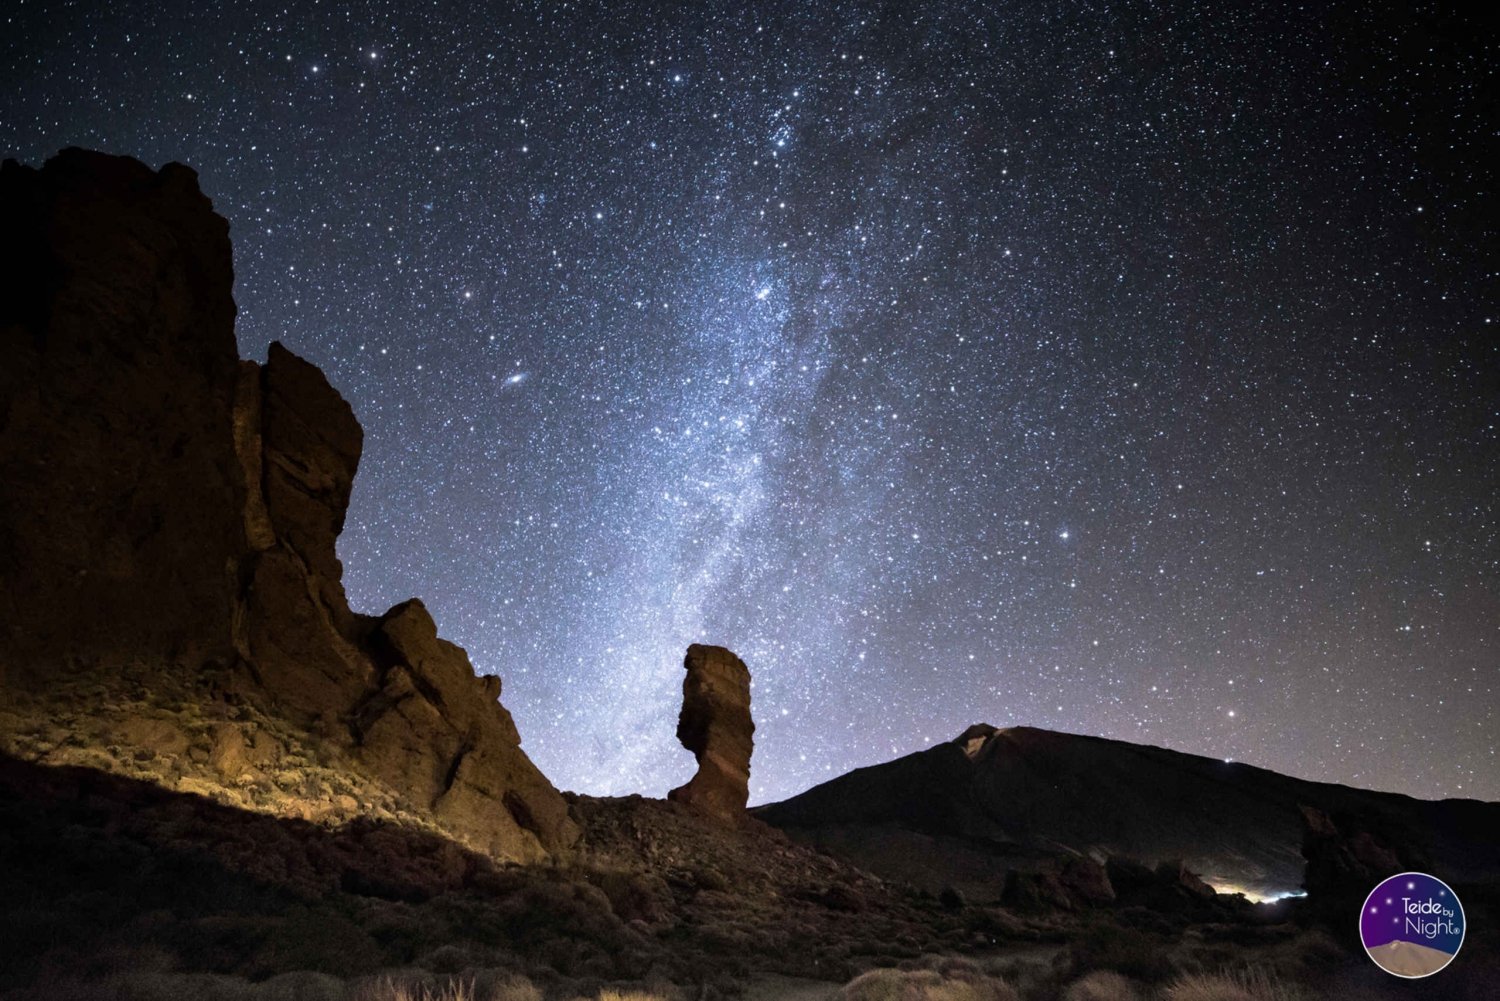 Teide by Night in Dutch or French: Sunset & Stargazing Tour